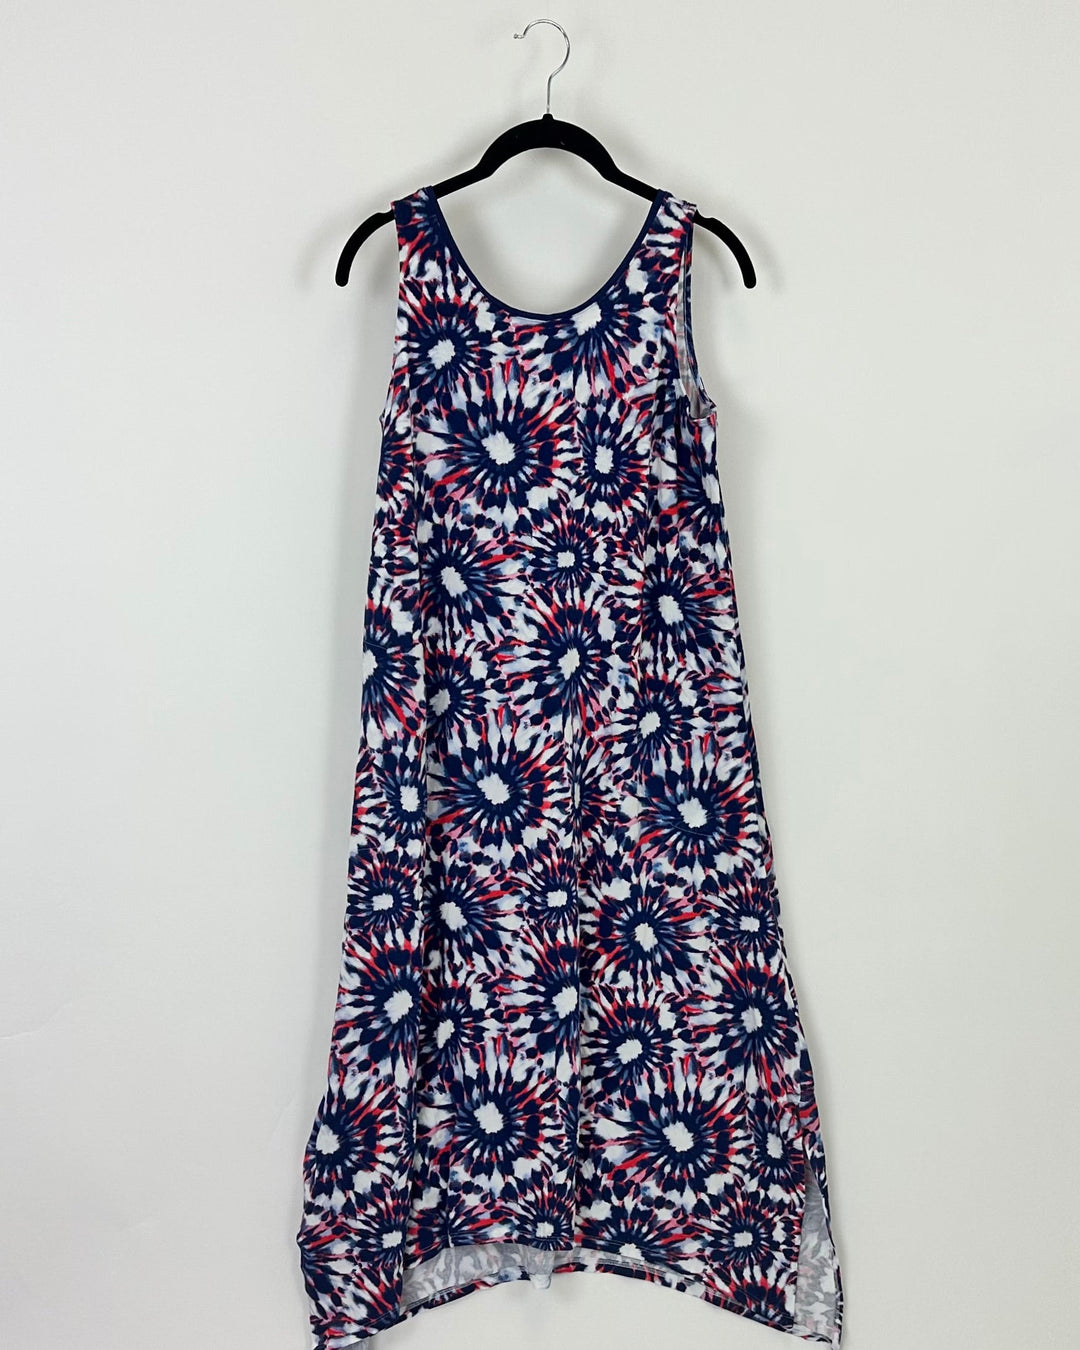 Sleeveless Abstract Print Nightgown - Small